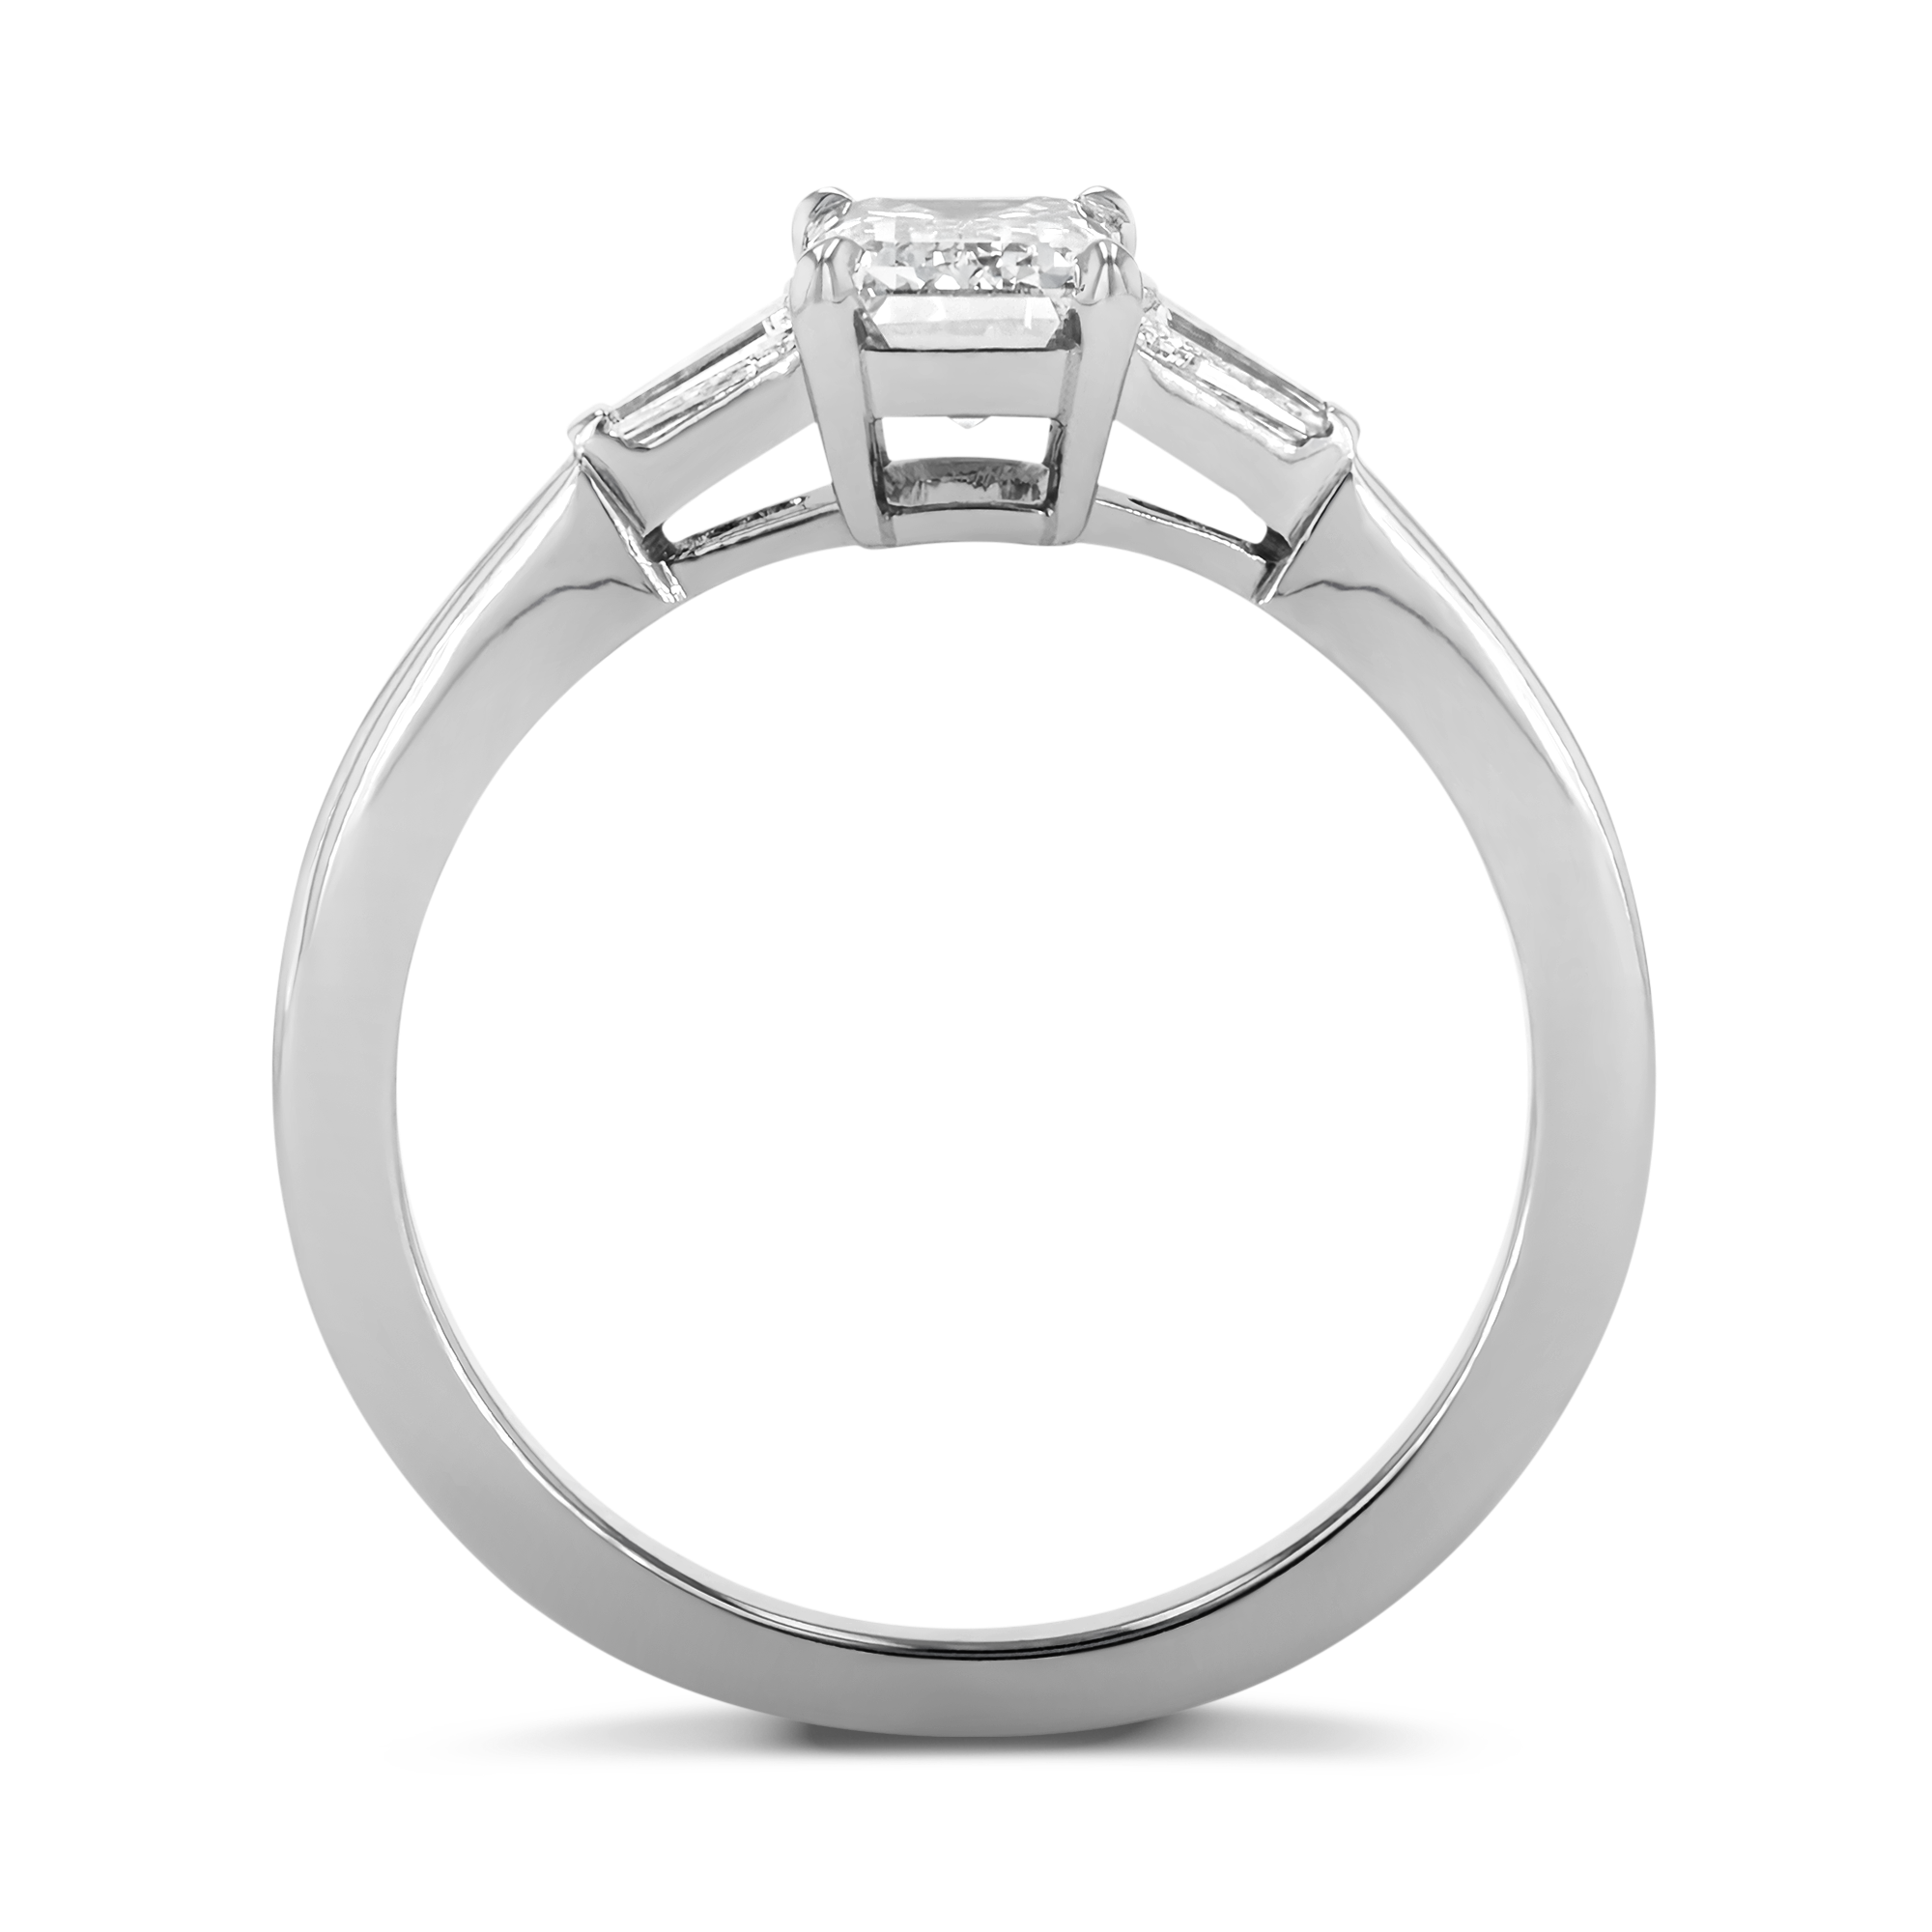 Regency 1.01ct Diamond Solitaire Ring Emerald Cut, Claw Set_3